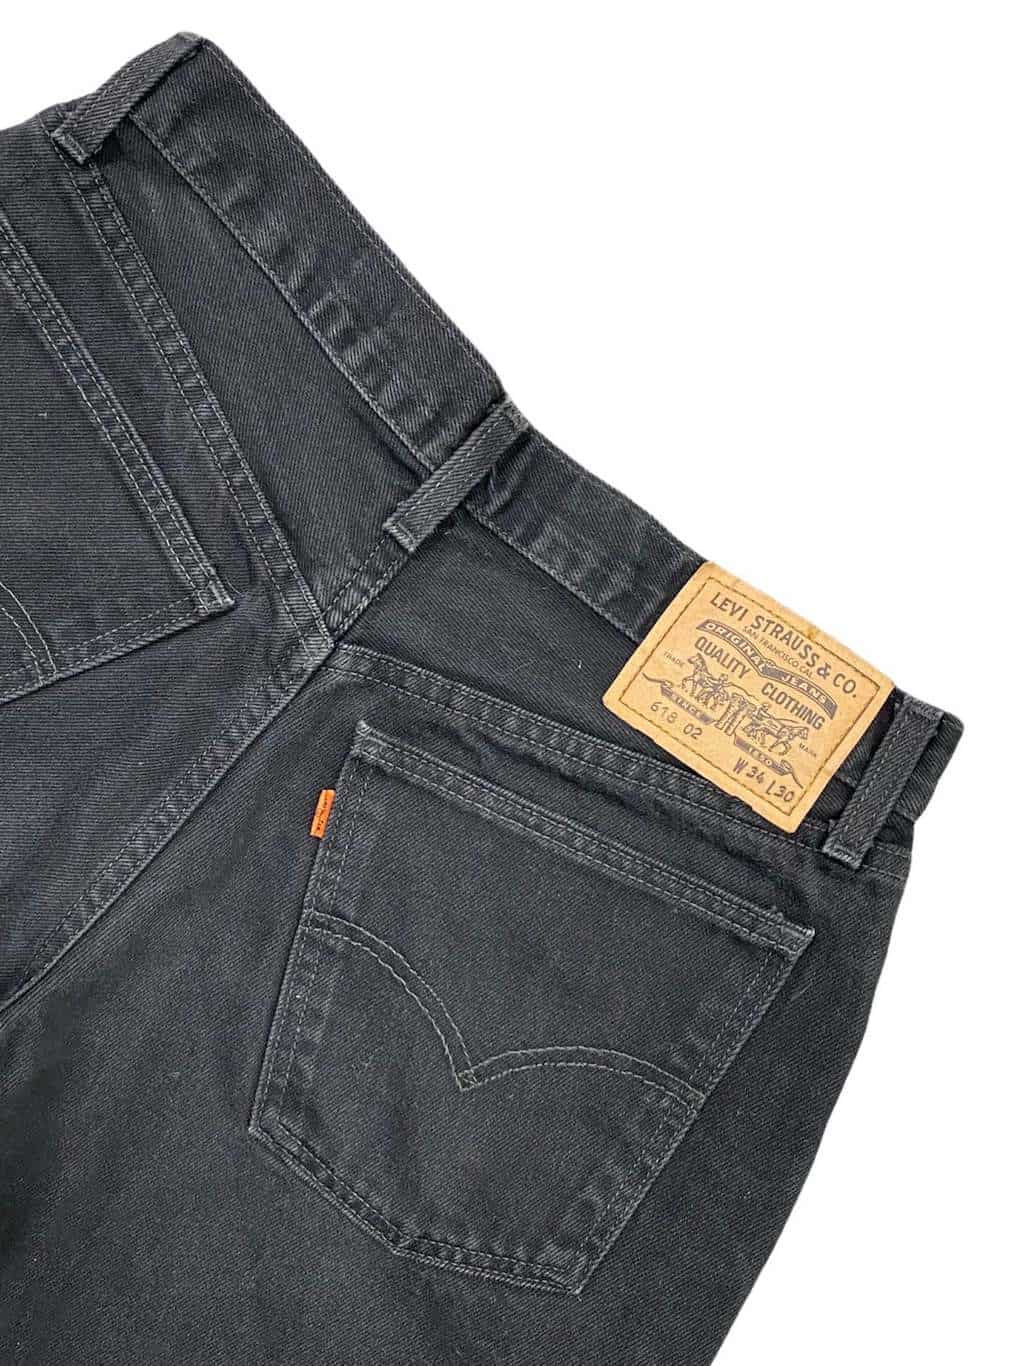 80s Levis vintage 618 jeans with orange tab, high waist, made in the UK -  W31 x L29 - St Cyr Vintage